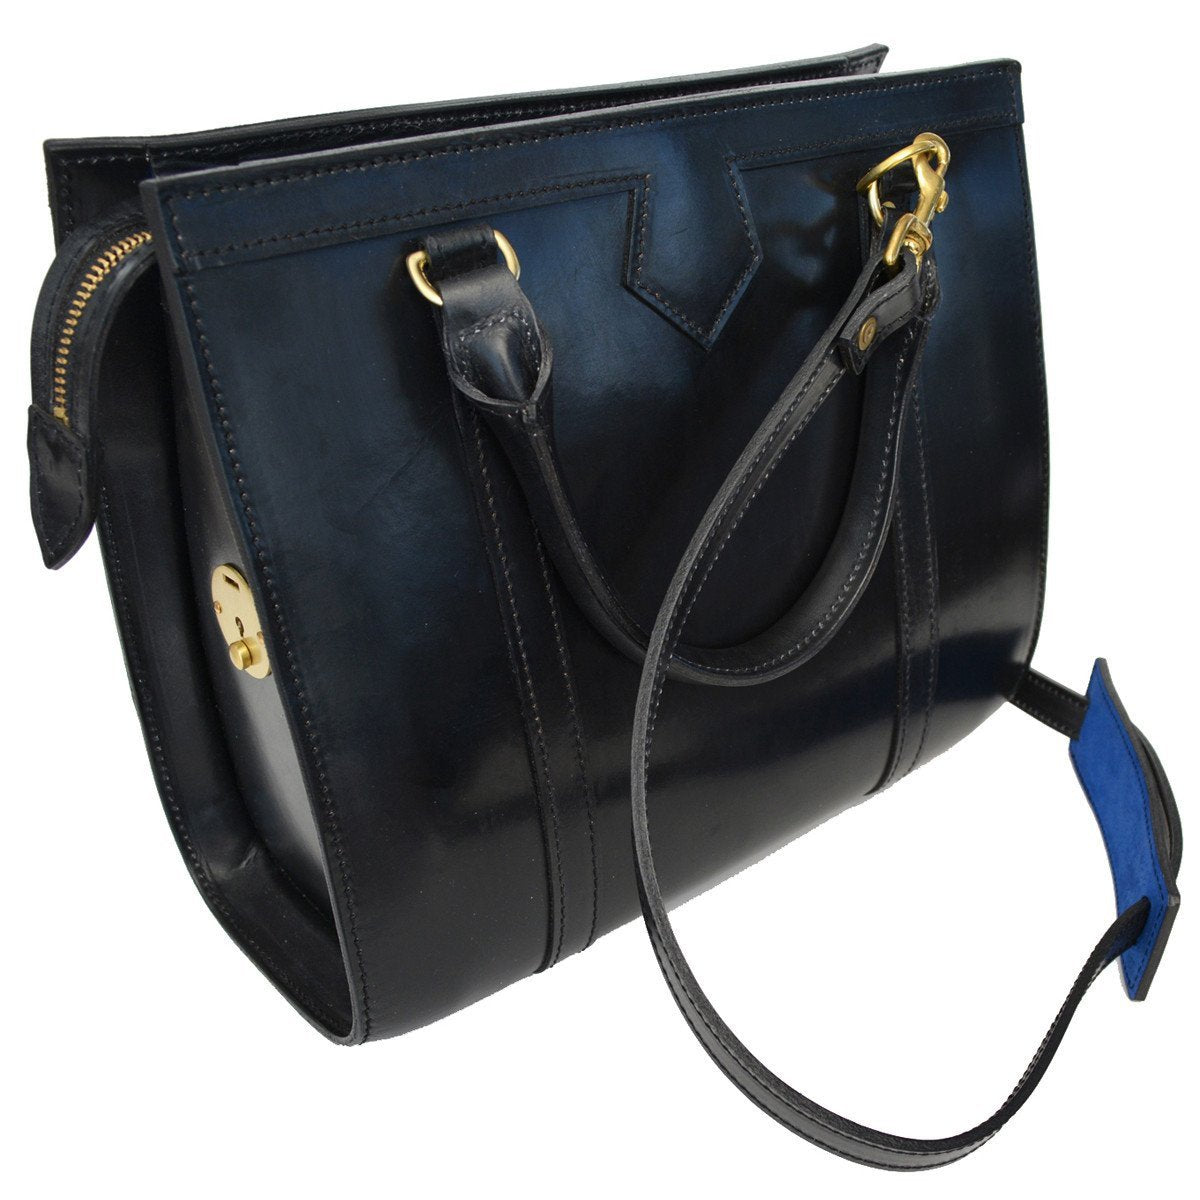 Classic Beatrice Handbag, Black | Hand Stitched | English Leather | Sterling and Burke-Handbag-Sterling-and-Burke